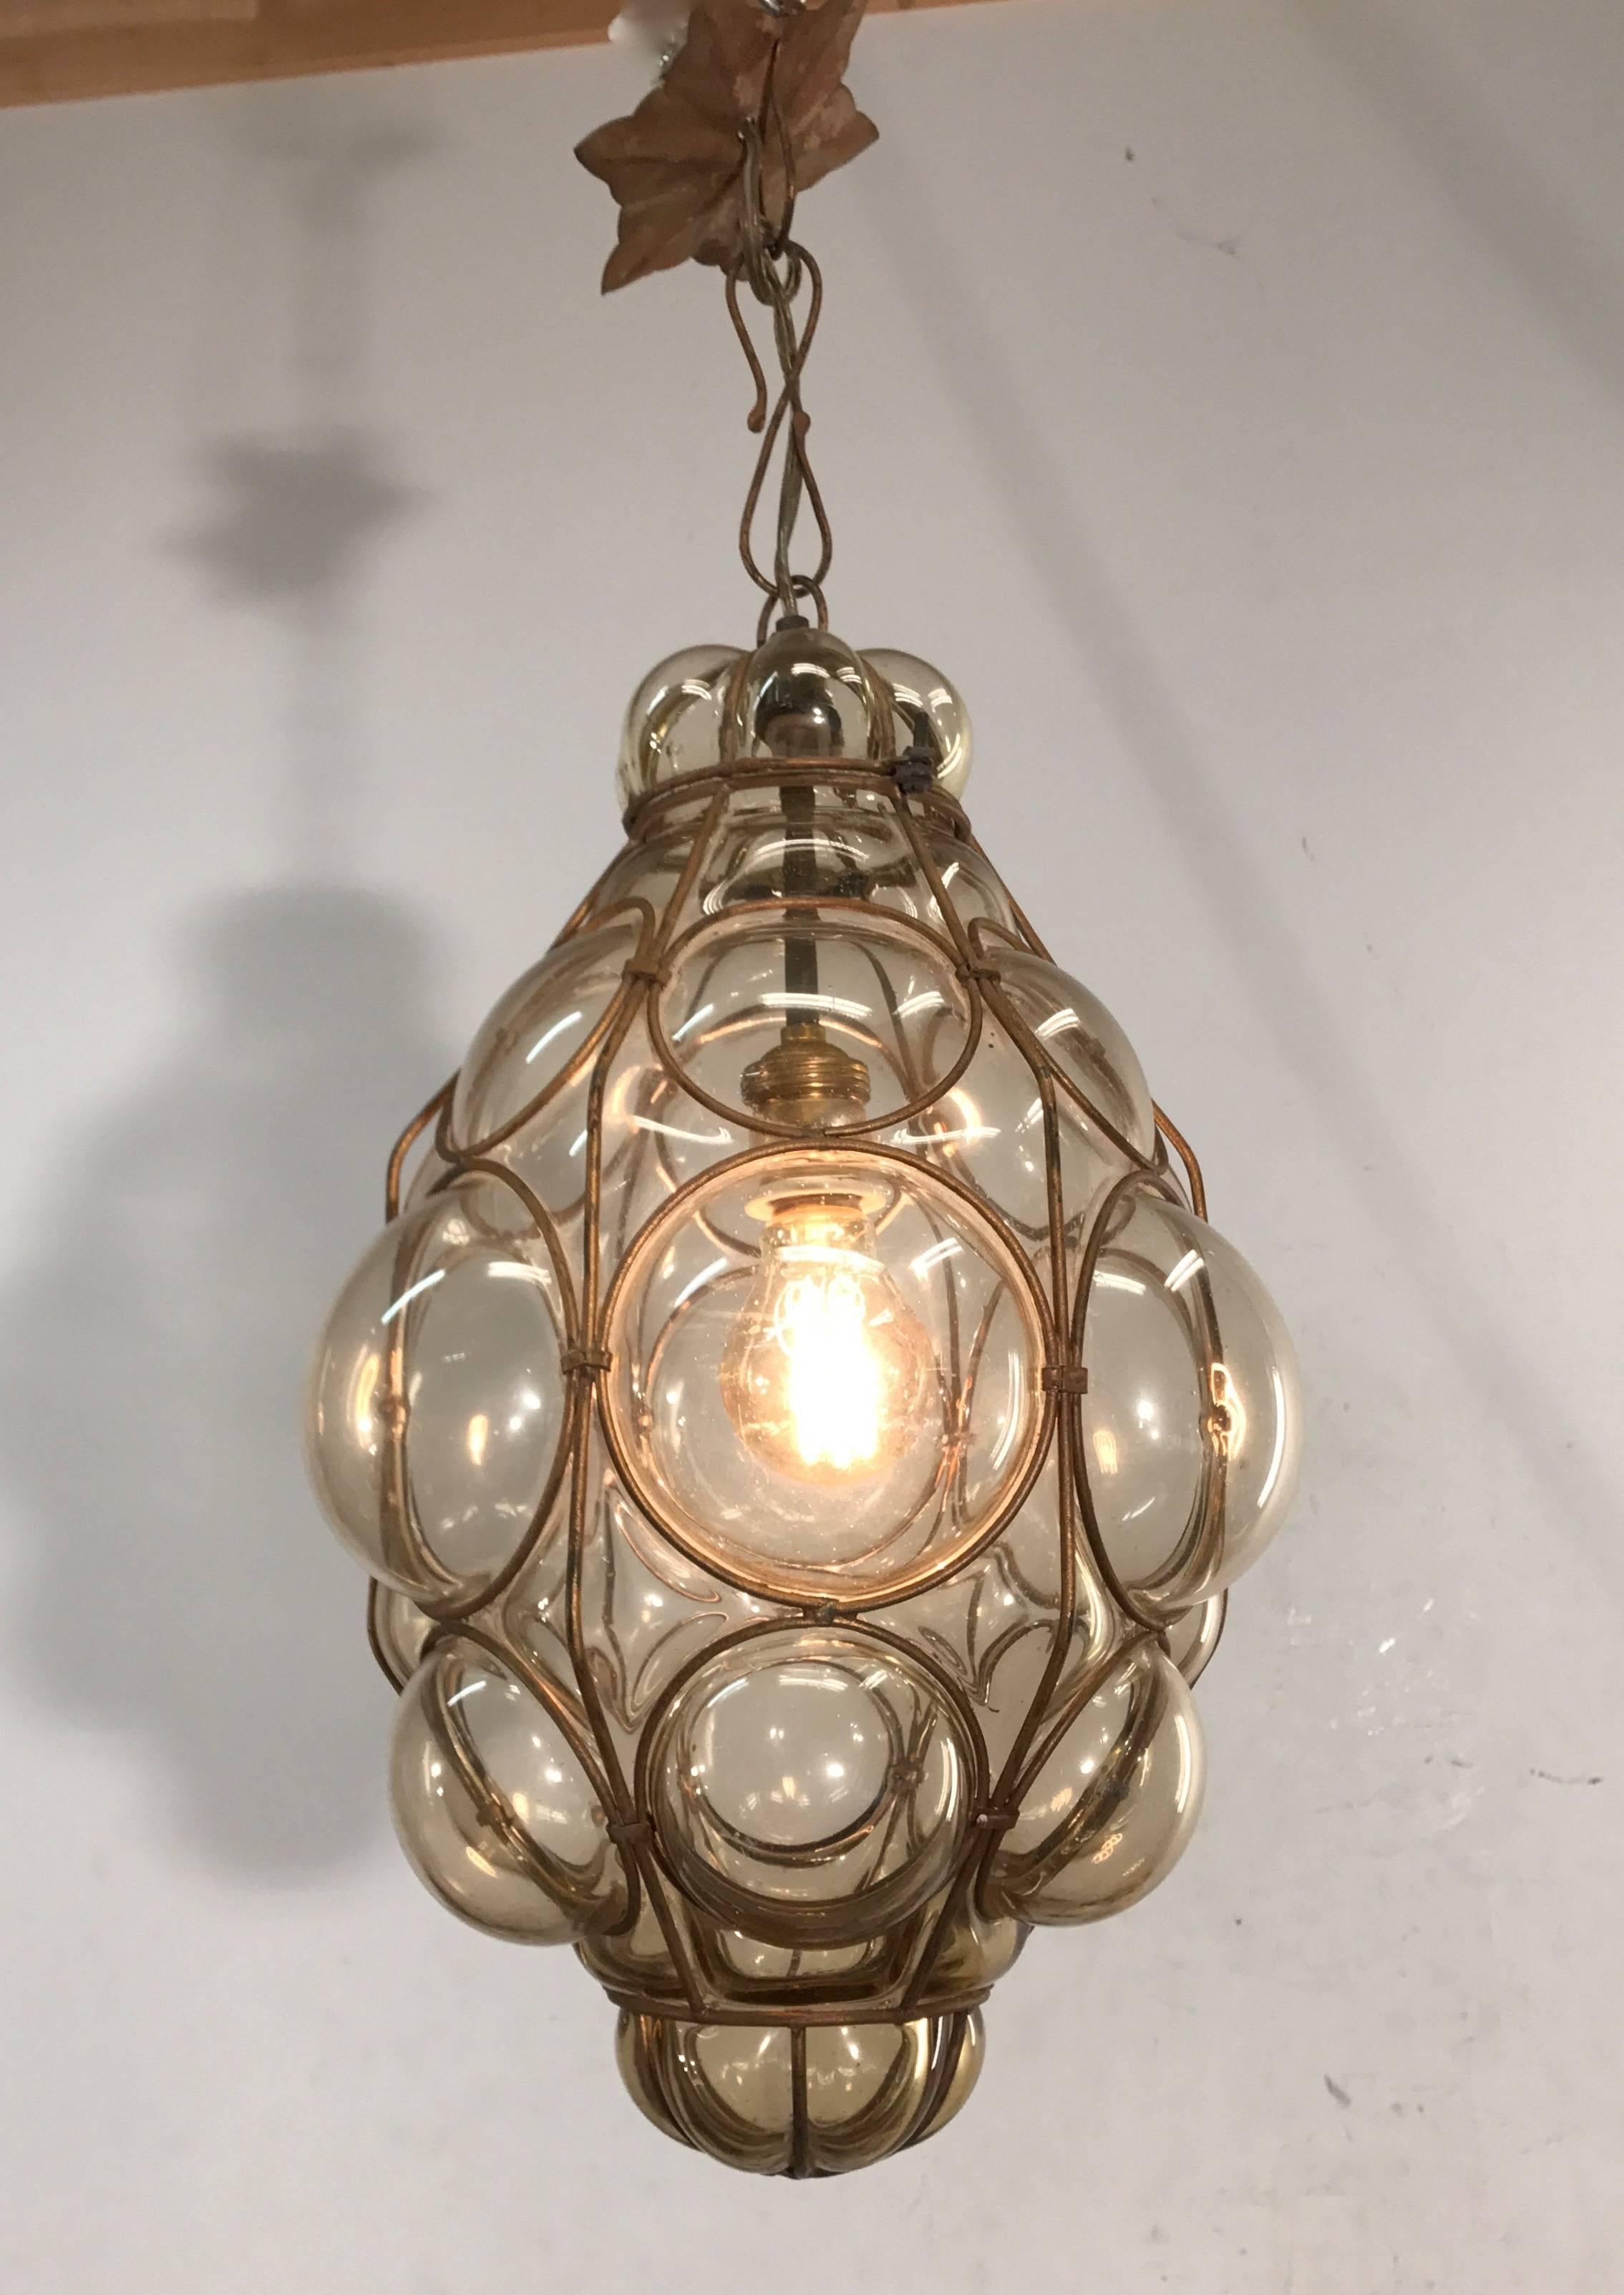 Hand-Crafted Antique and Rare Venetian Mouth Blown Glass in Metal Frame Pendant Light